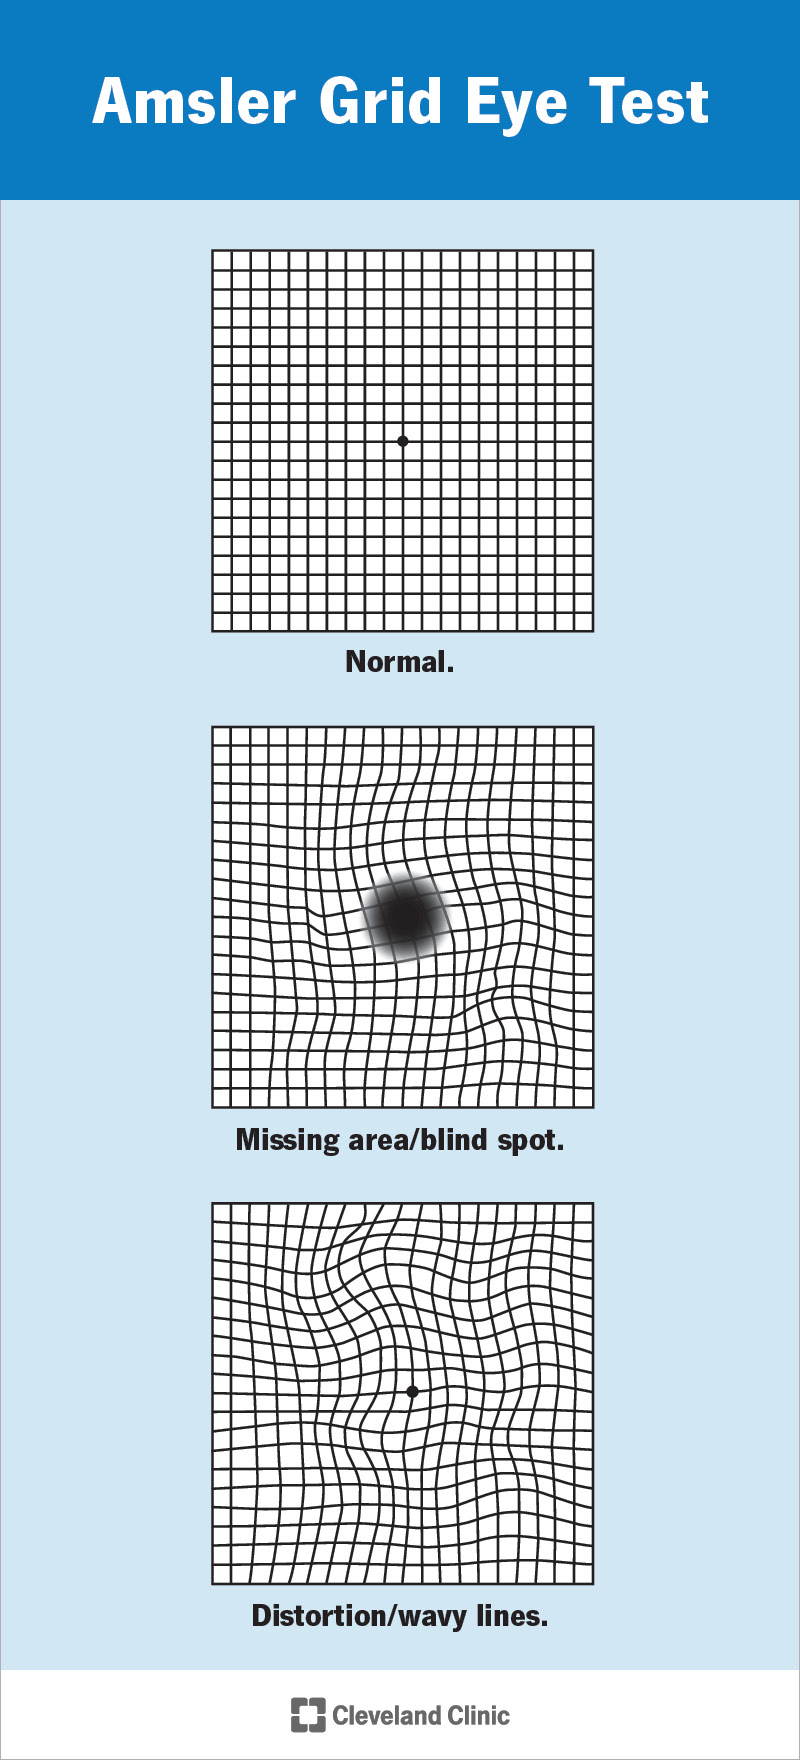 The Amsler grid eye test makes it easier to see distortions or gaps in your vision.